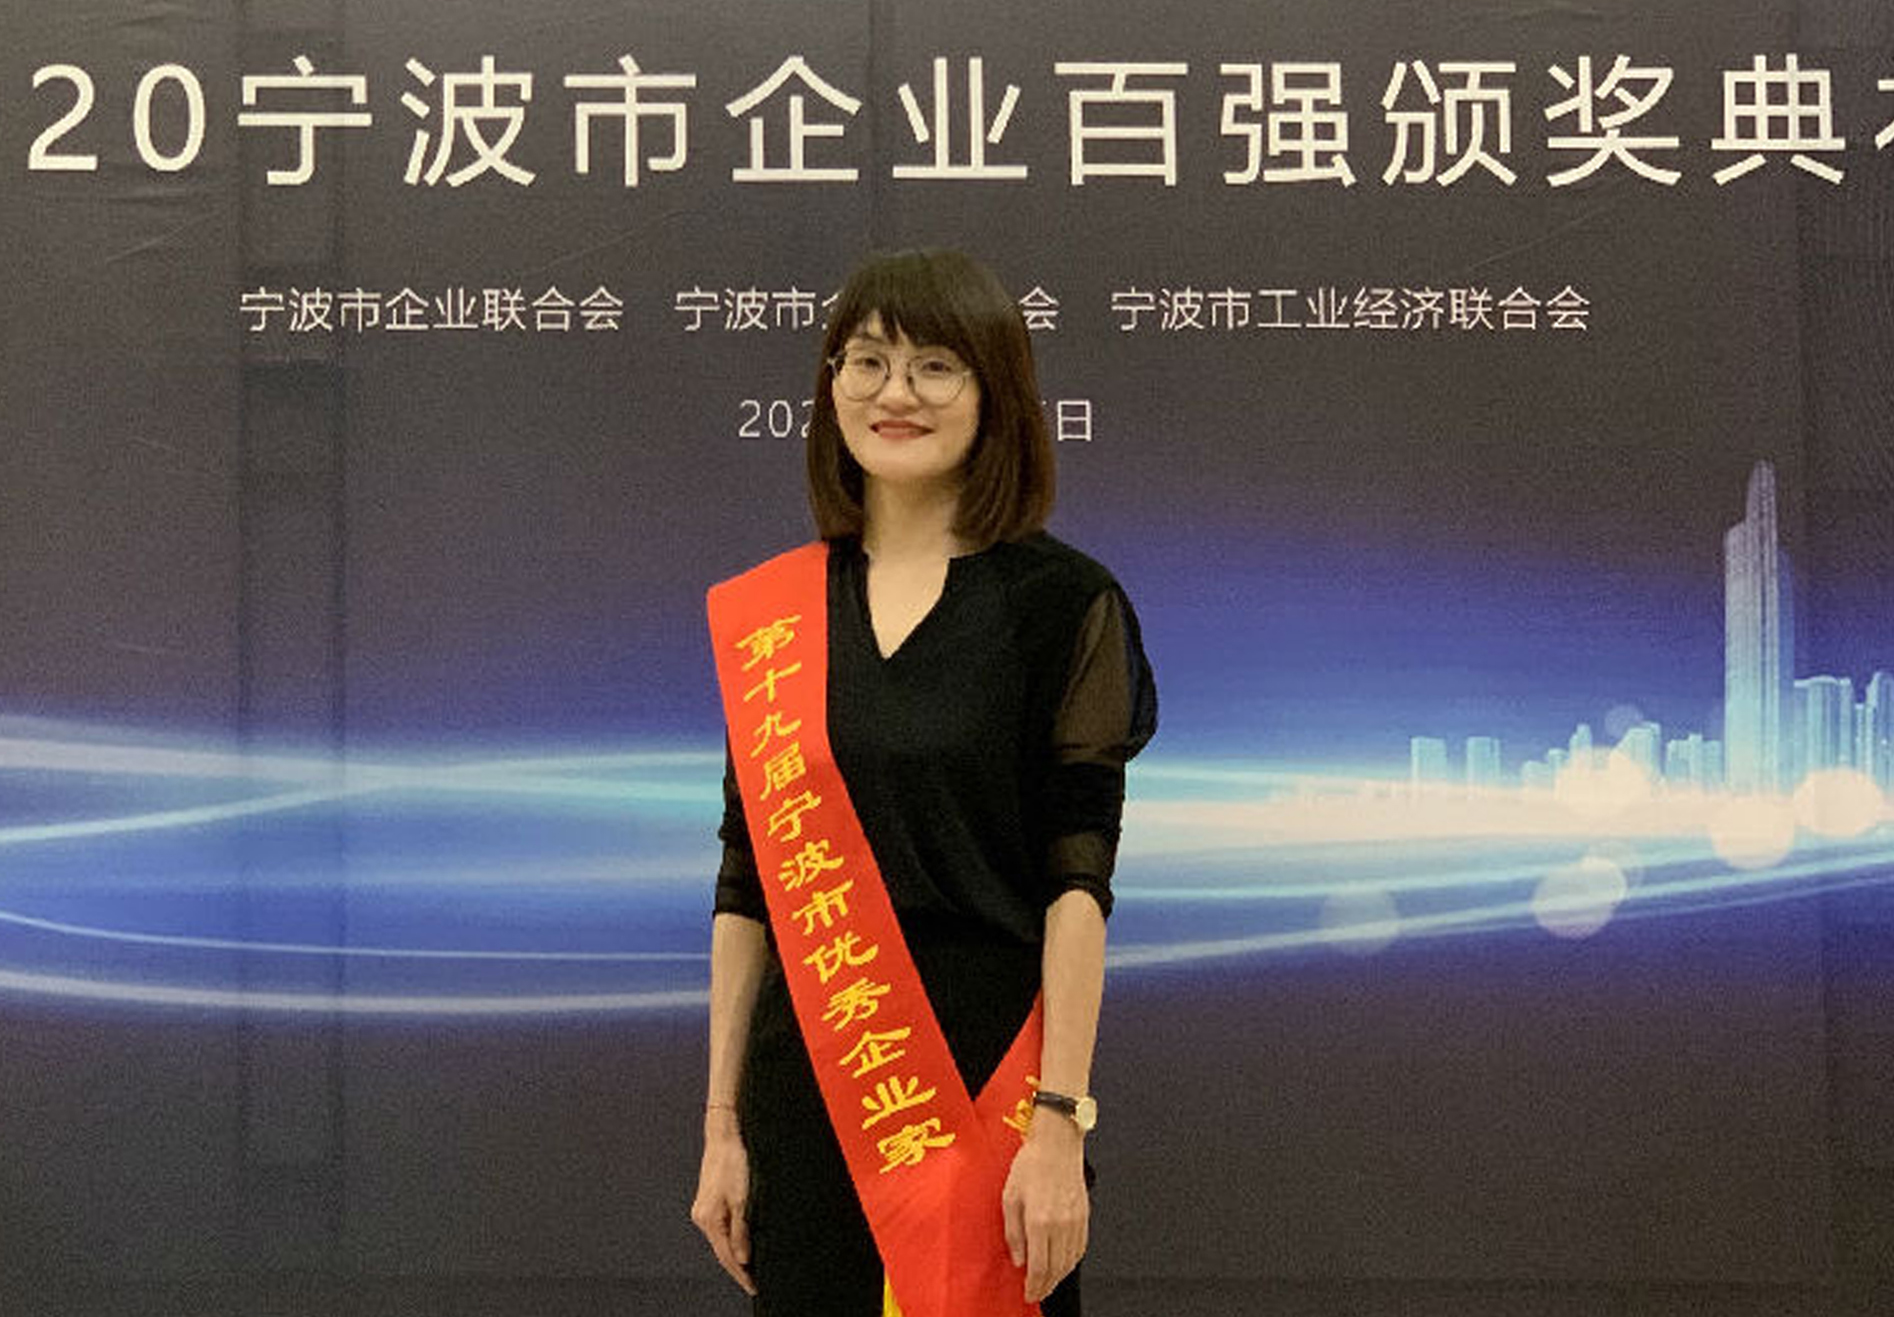 Congratulations to Ivy Shi, general manager of Ningshing Ubay, for winning the honorary title of 